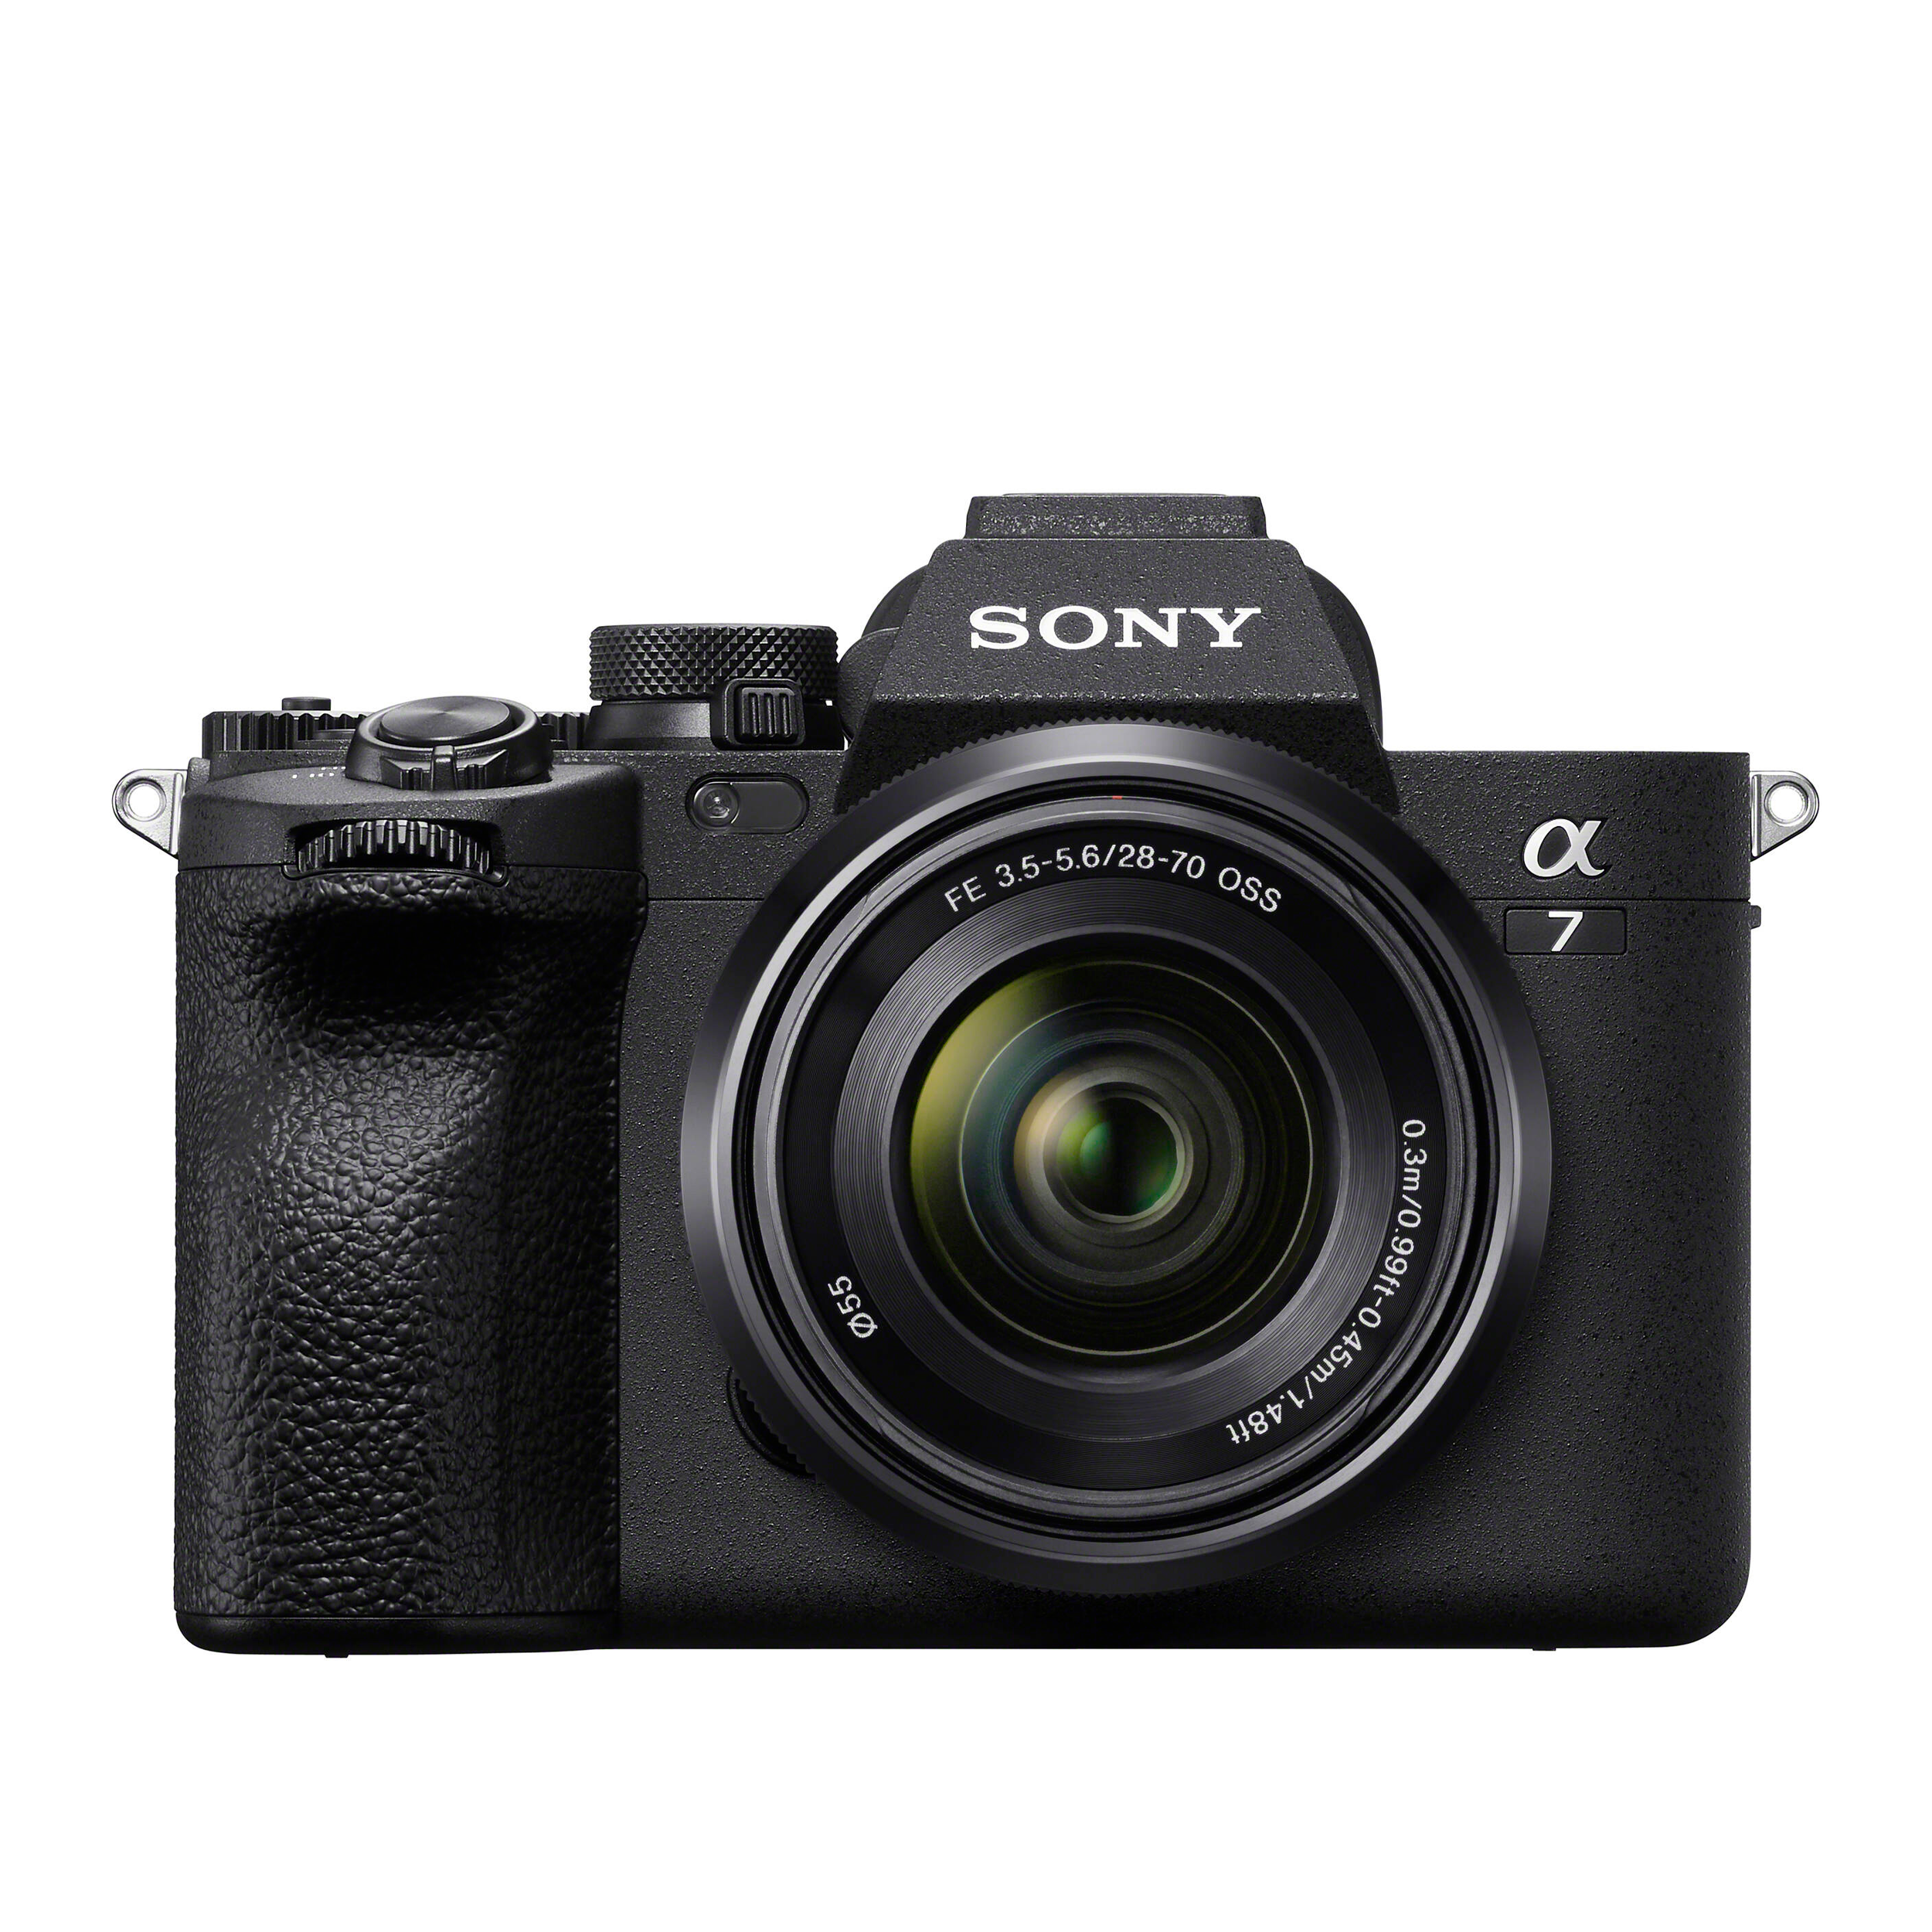 Sony Alpha a7 IV Mirrorless Digital Camera ILCE7M4 - with 28-70mm Lens